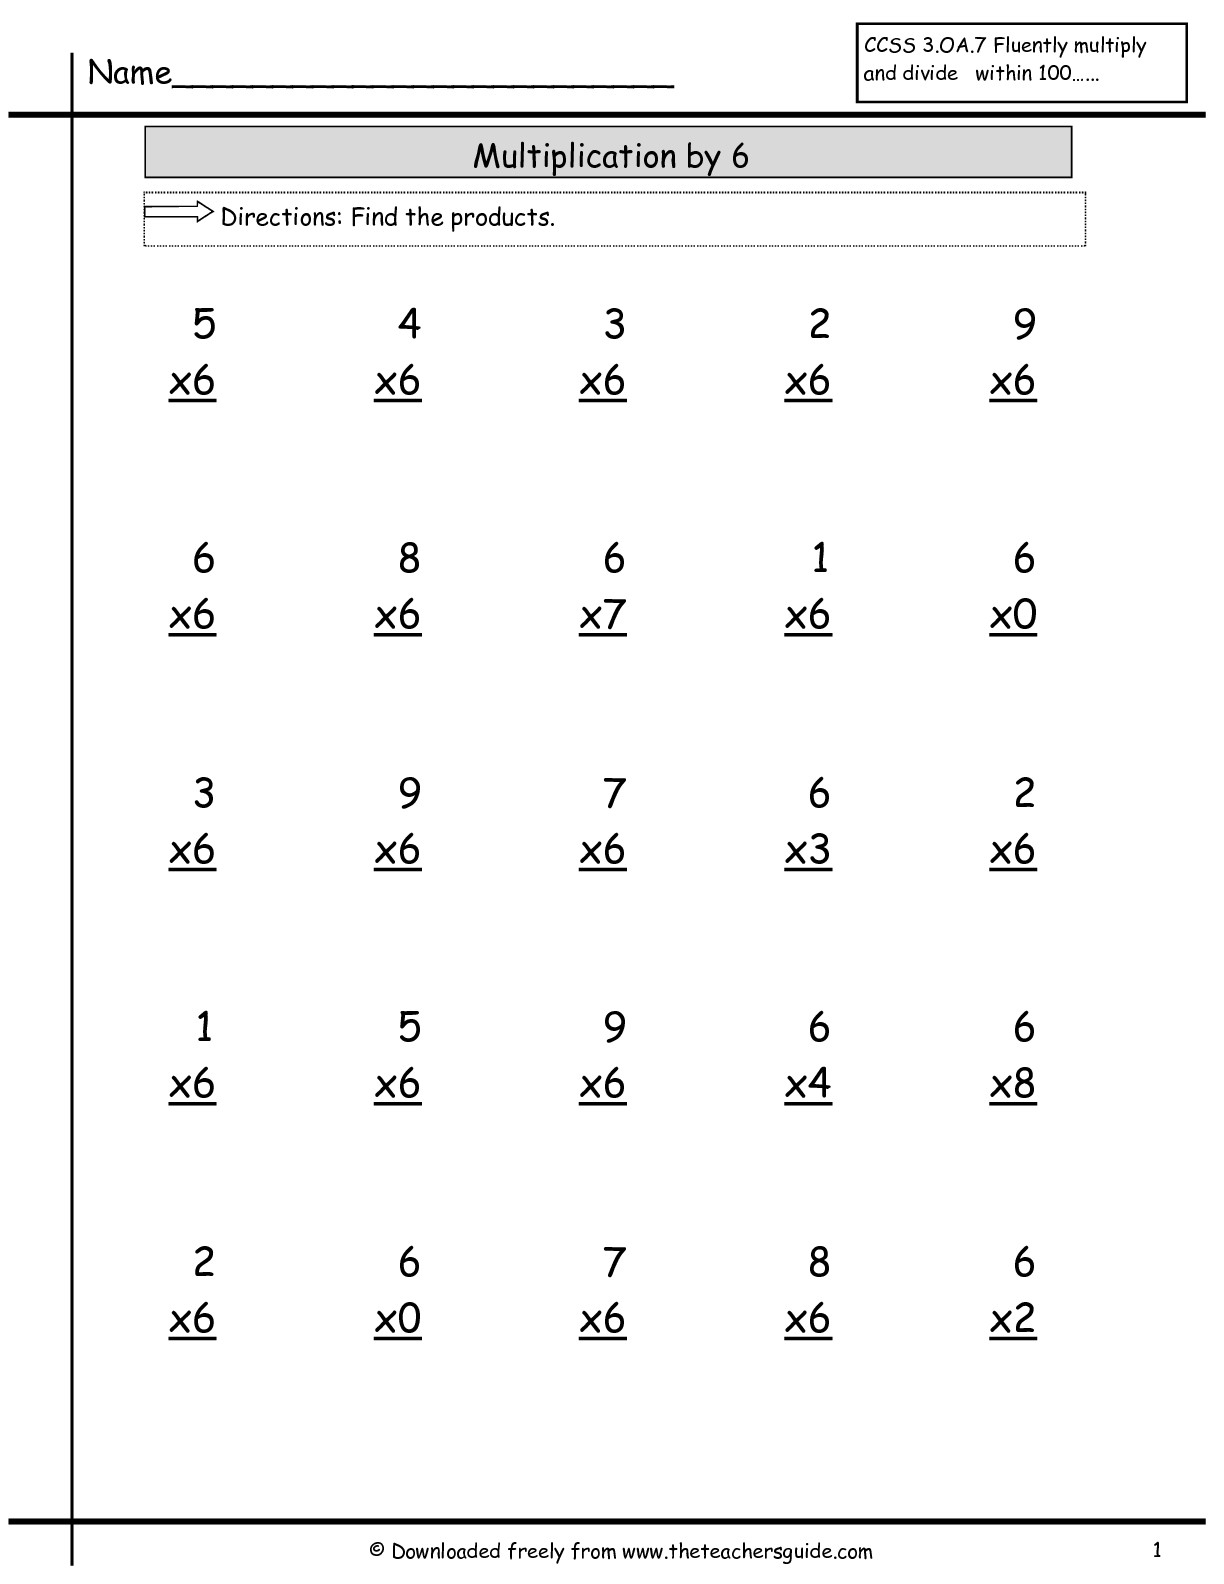 Multiplication Facts Worksheets From The Teacher&amp;#039;s Guide regarding Multiplication Worksheets 6S And 7S